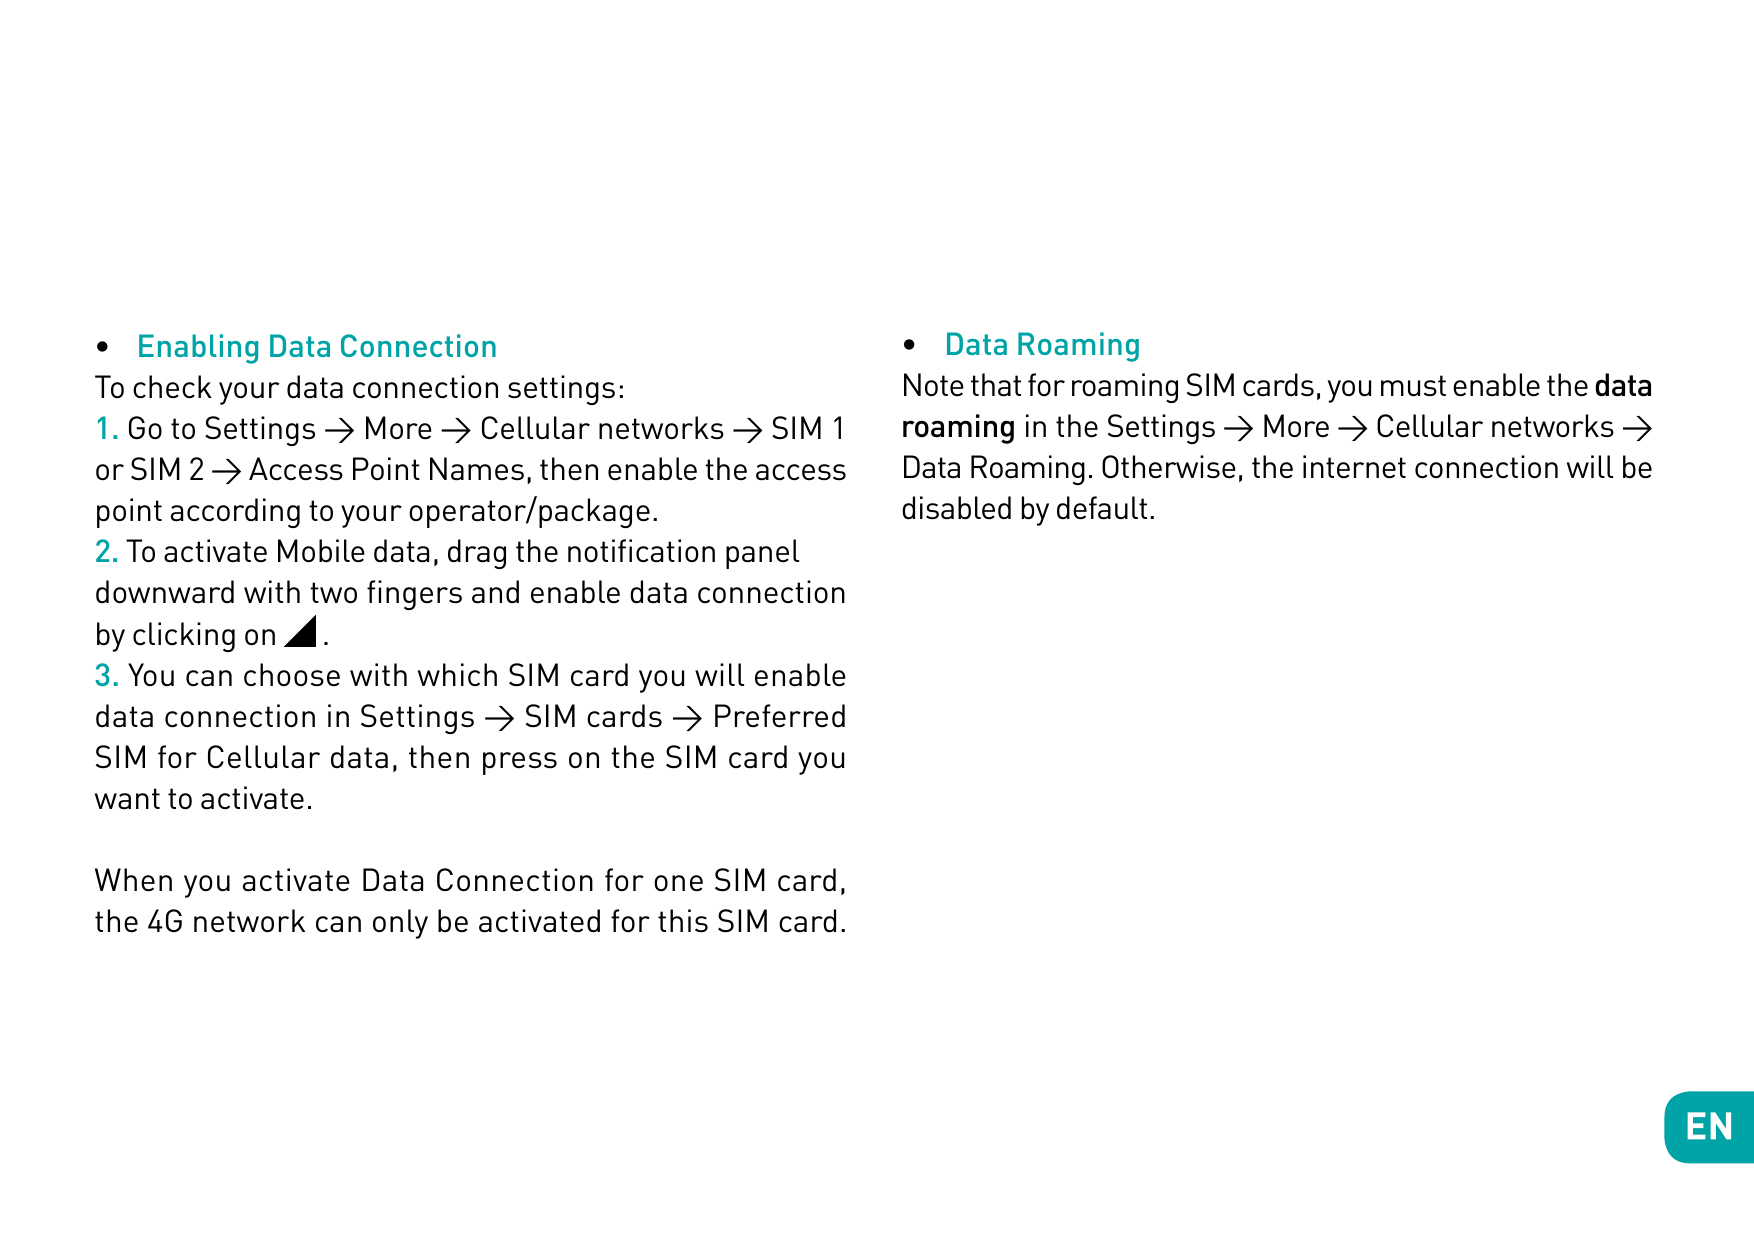 • Enabling Data ConnectionTo check your data connection settings:1. Go to Settings > More > Cellular networks > SIM 1or SIM 2 > 